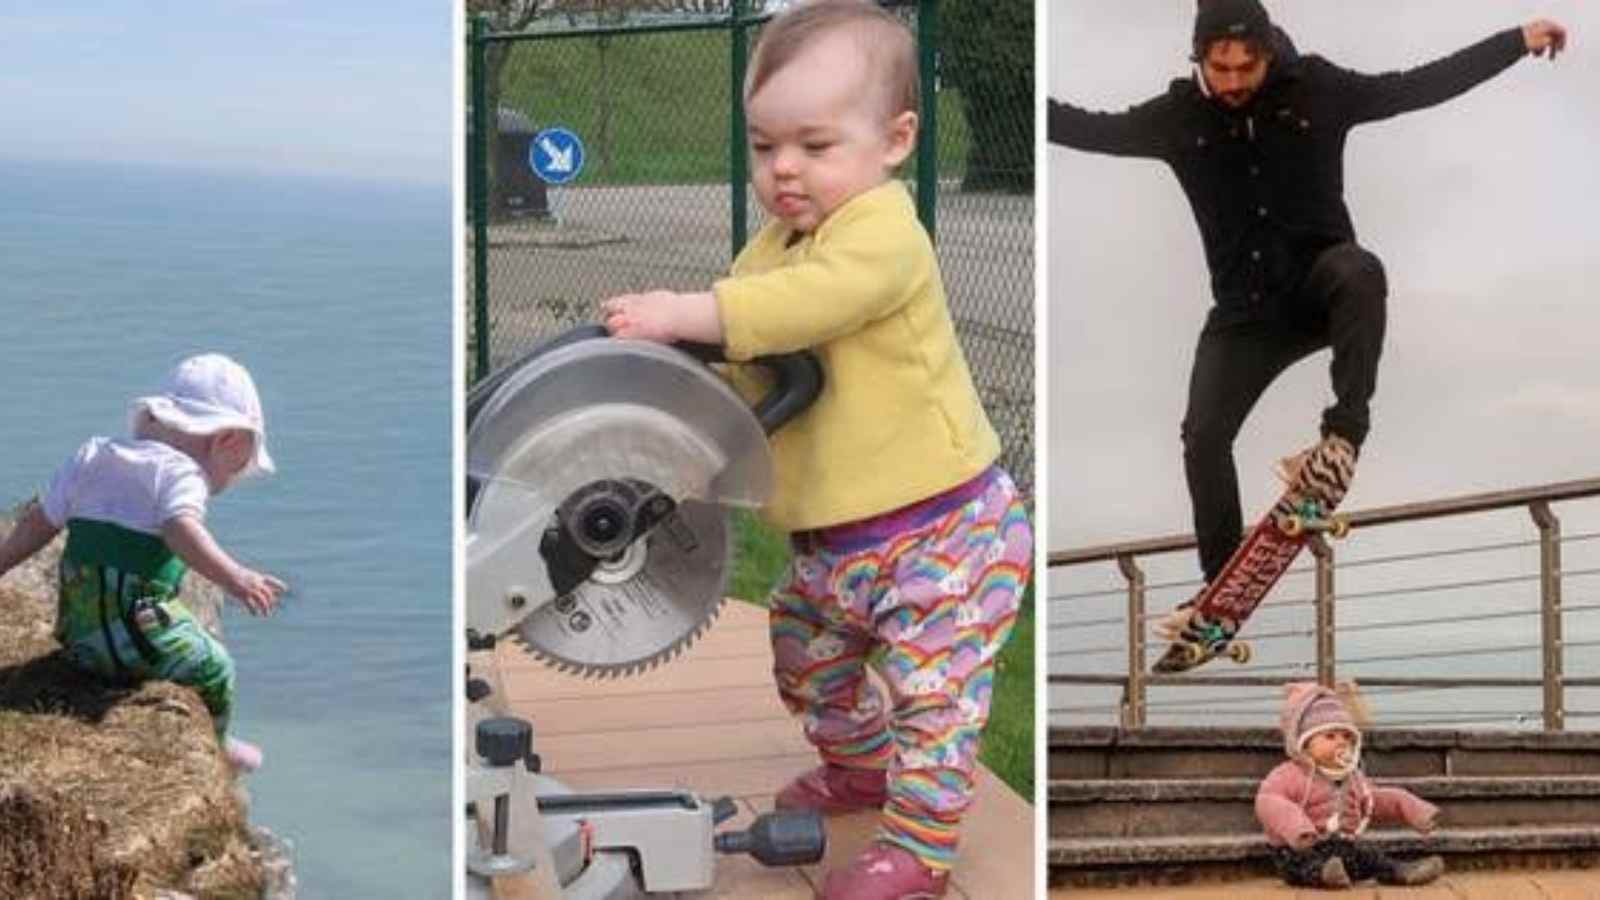 Kenny shares viral-worthy photoshopped pictures of his kid in dangerous situations